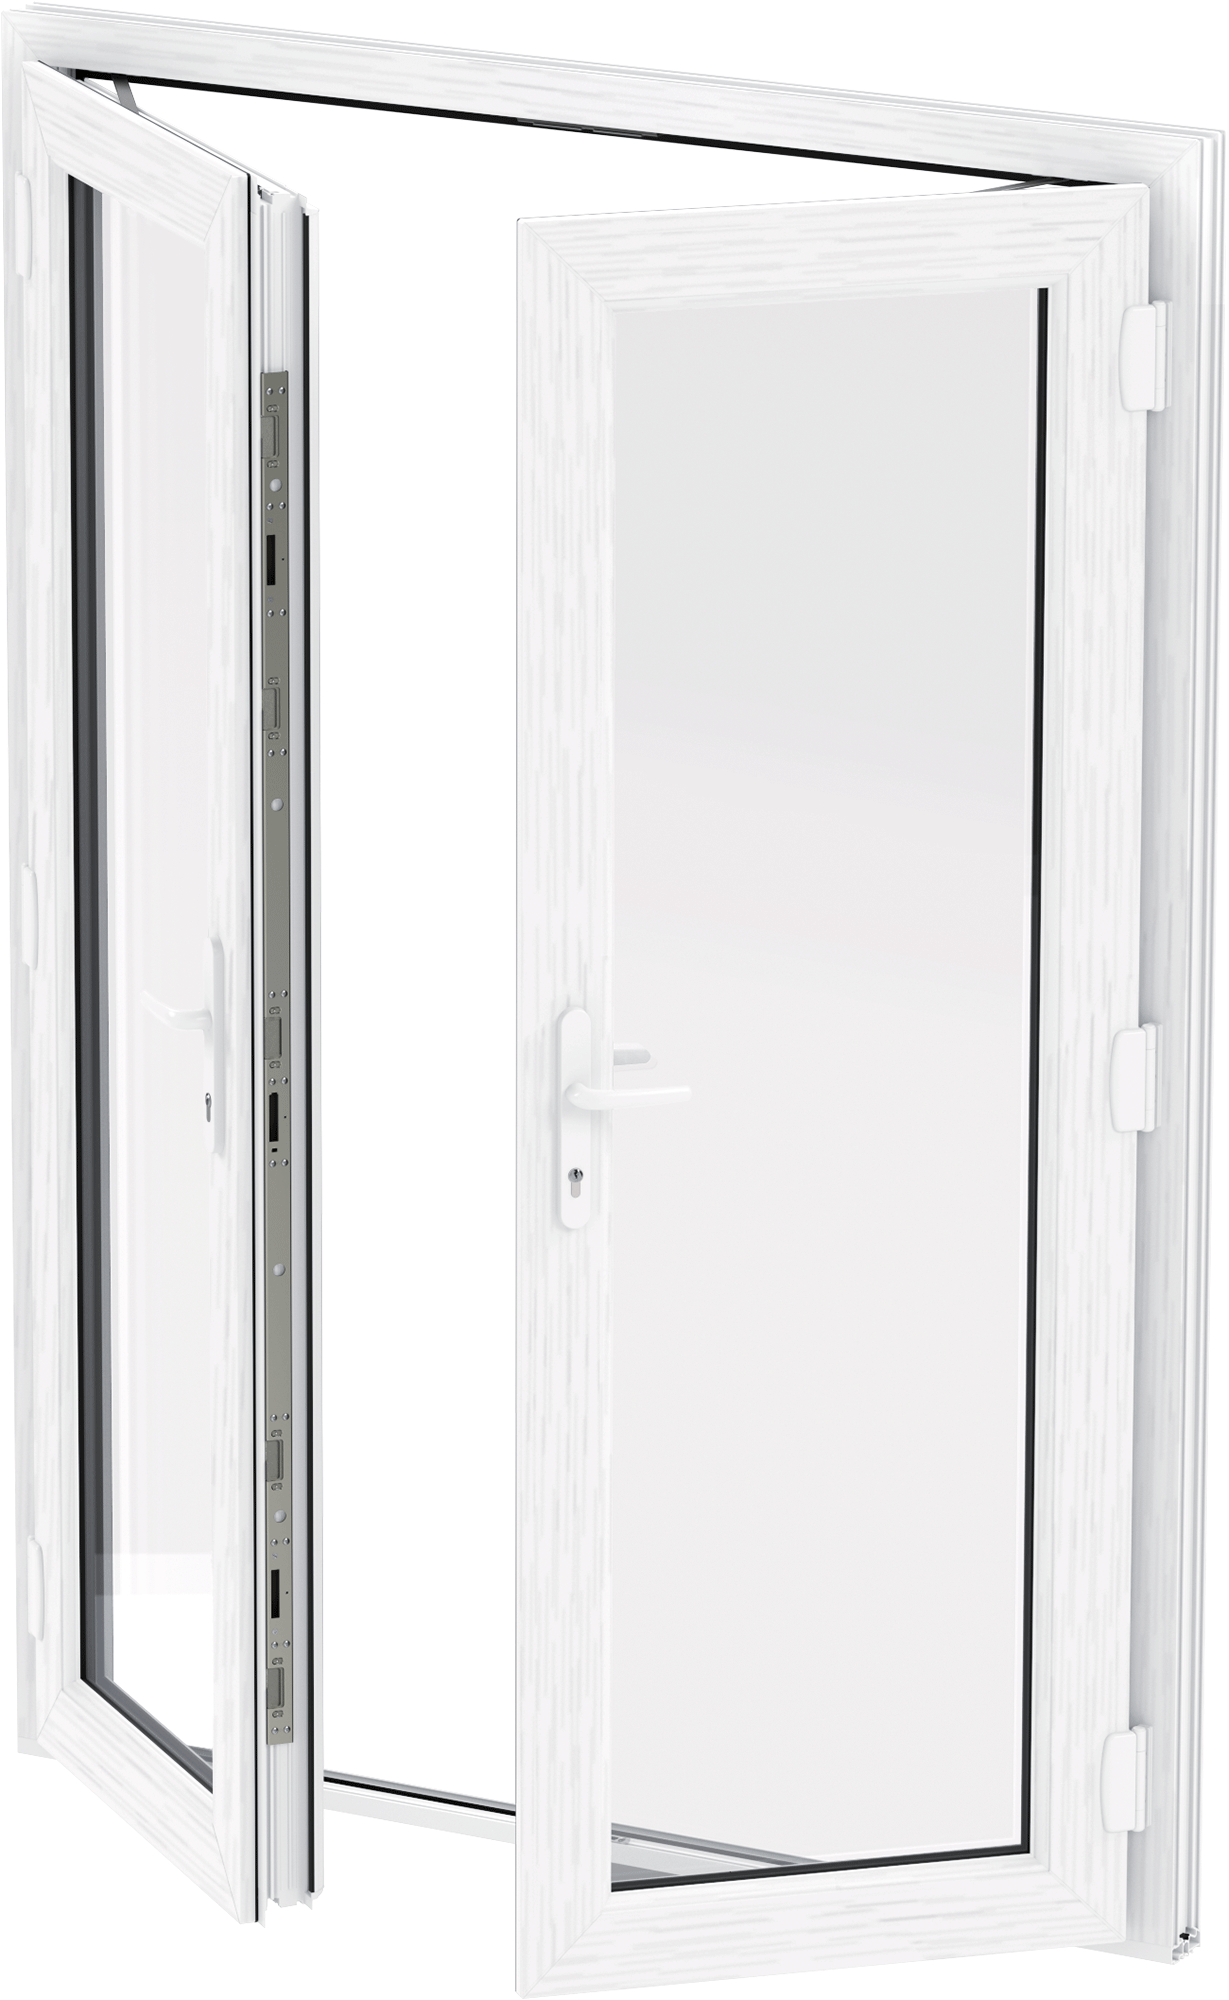 White Liniar french doors open 